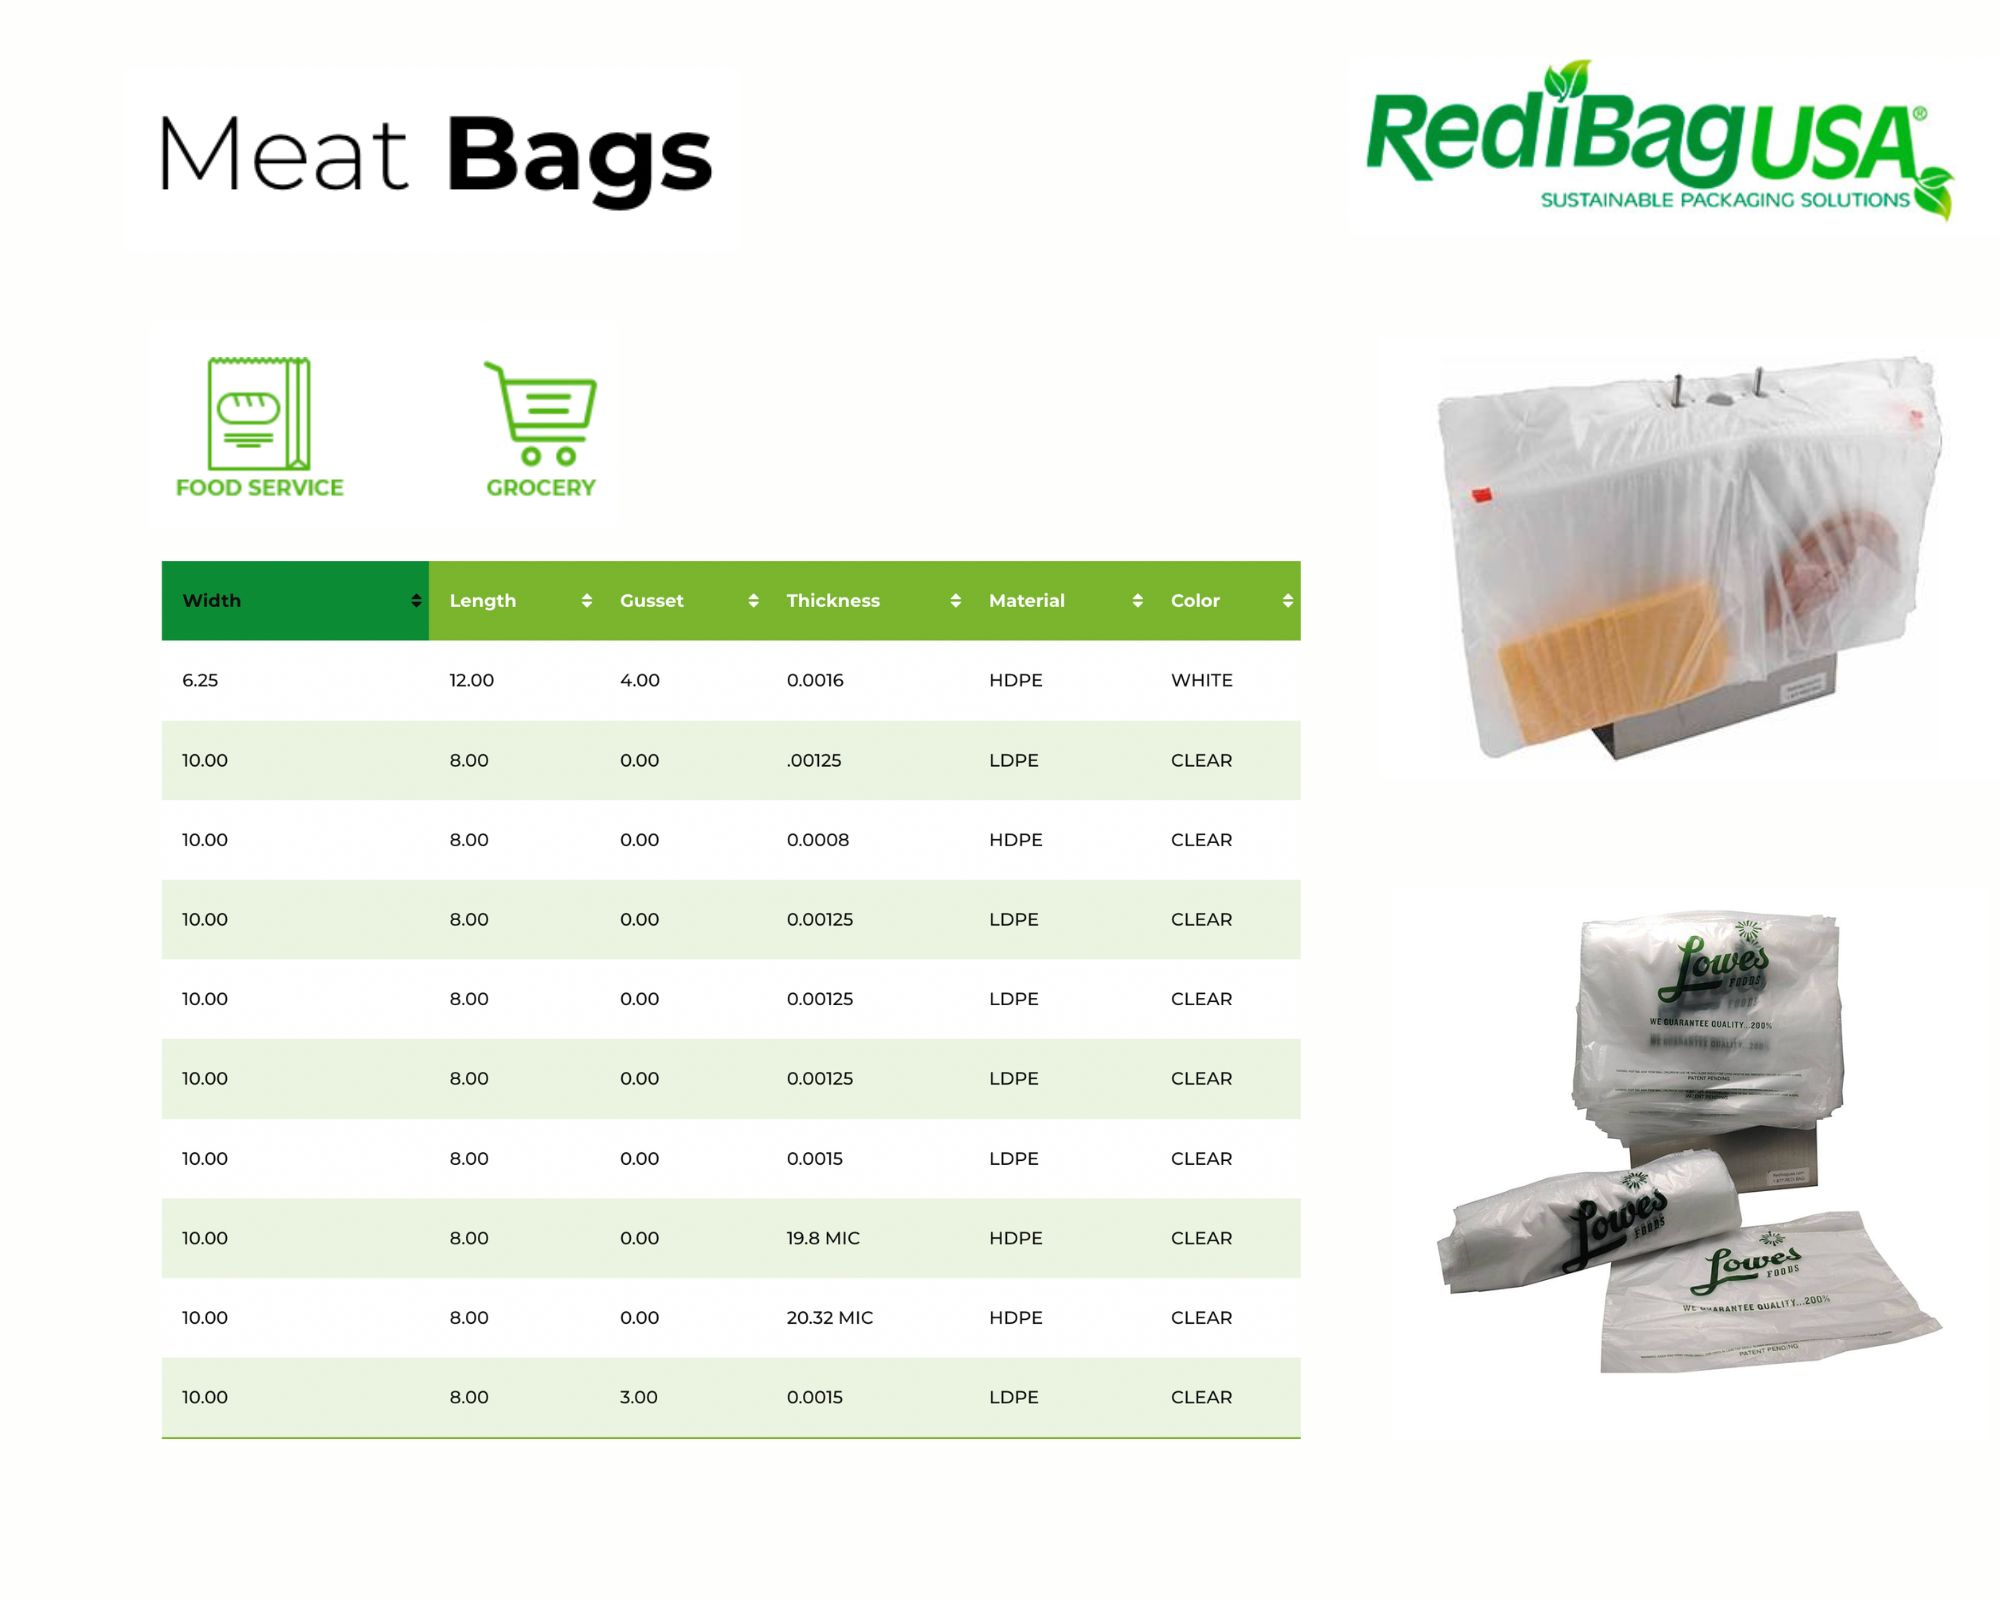 Meat bag specifications of RedibagUSA.